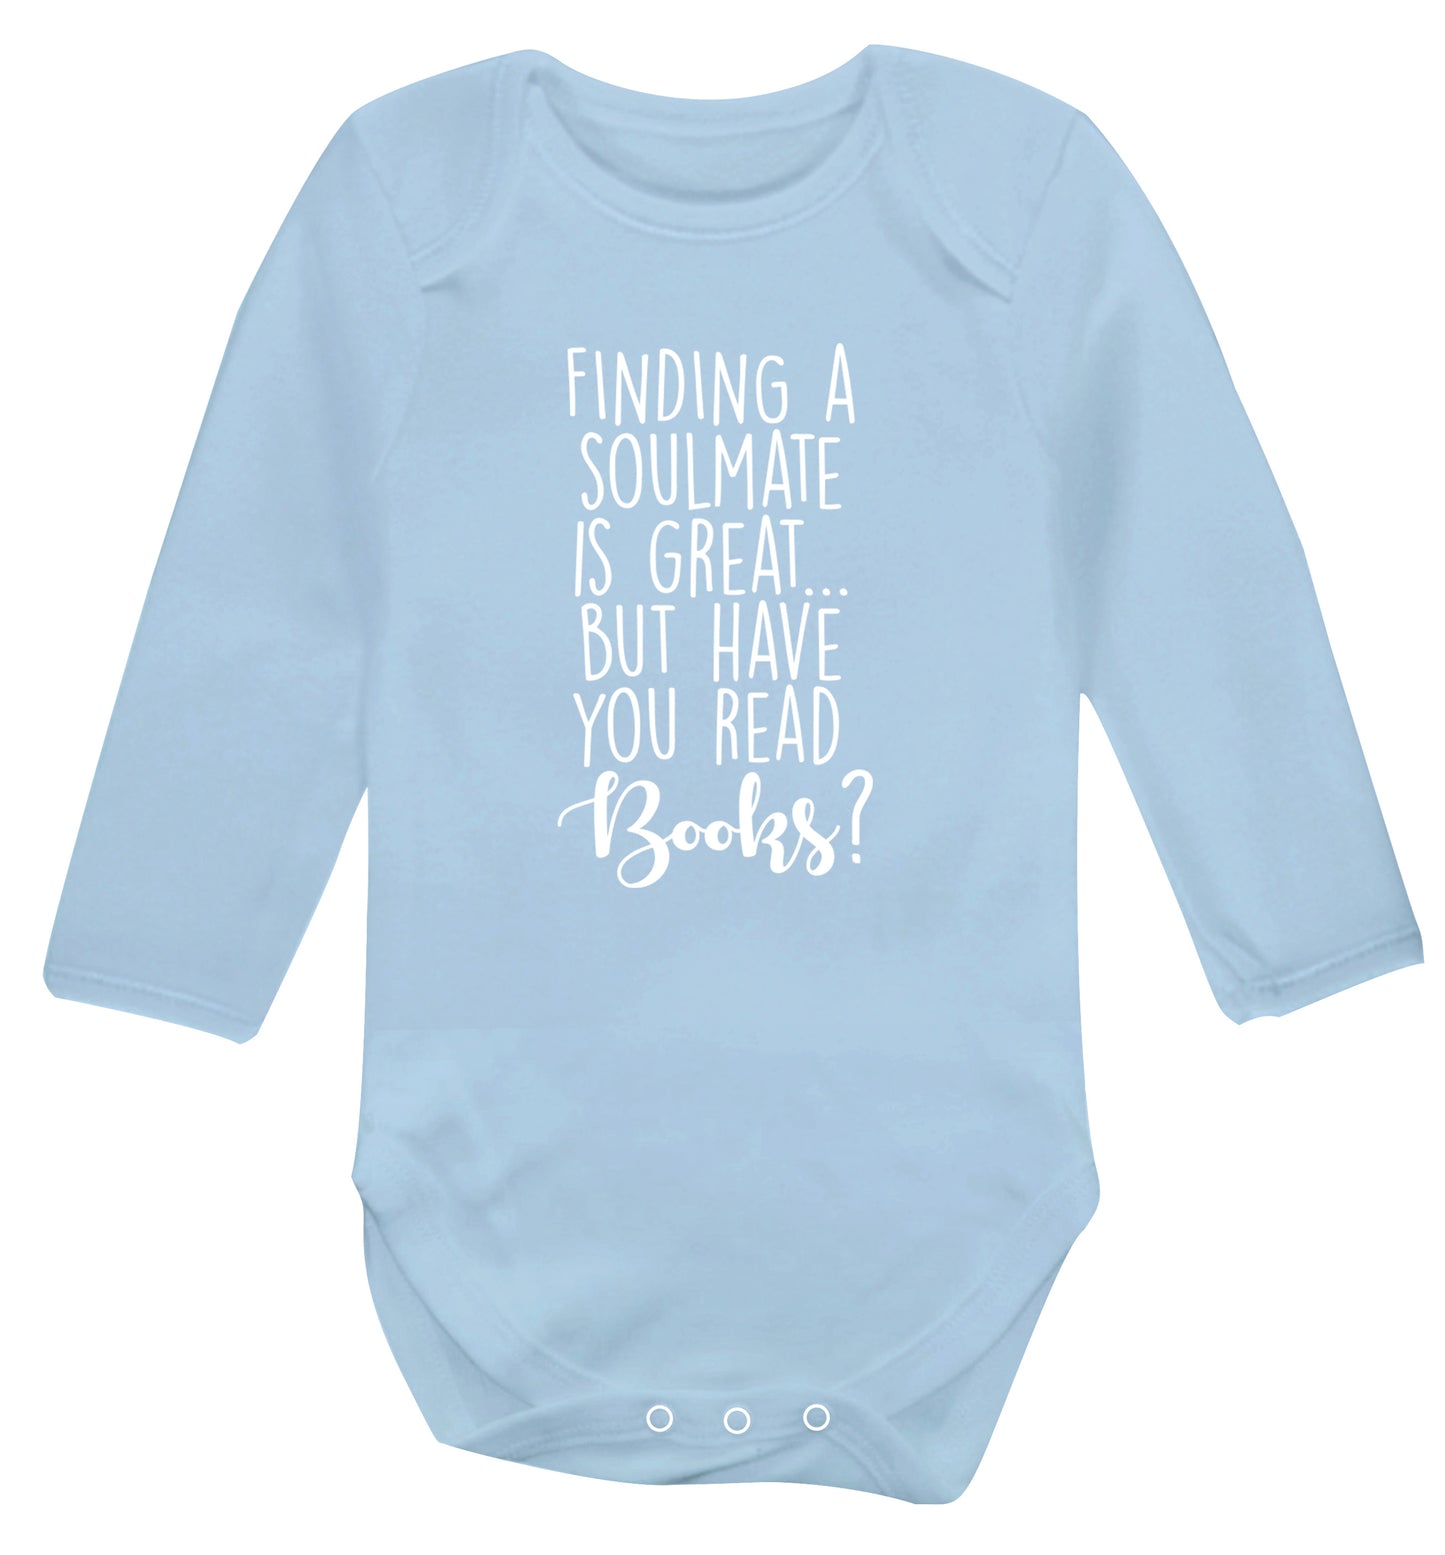 Finding a soulmate is great but have you read books? Baby Vest long sleeved pale blue 6-12 months